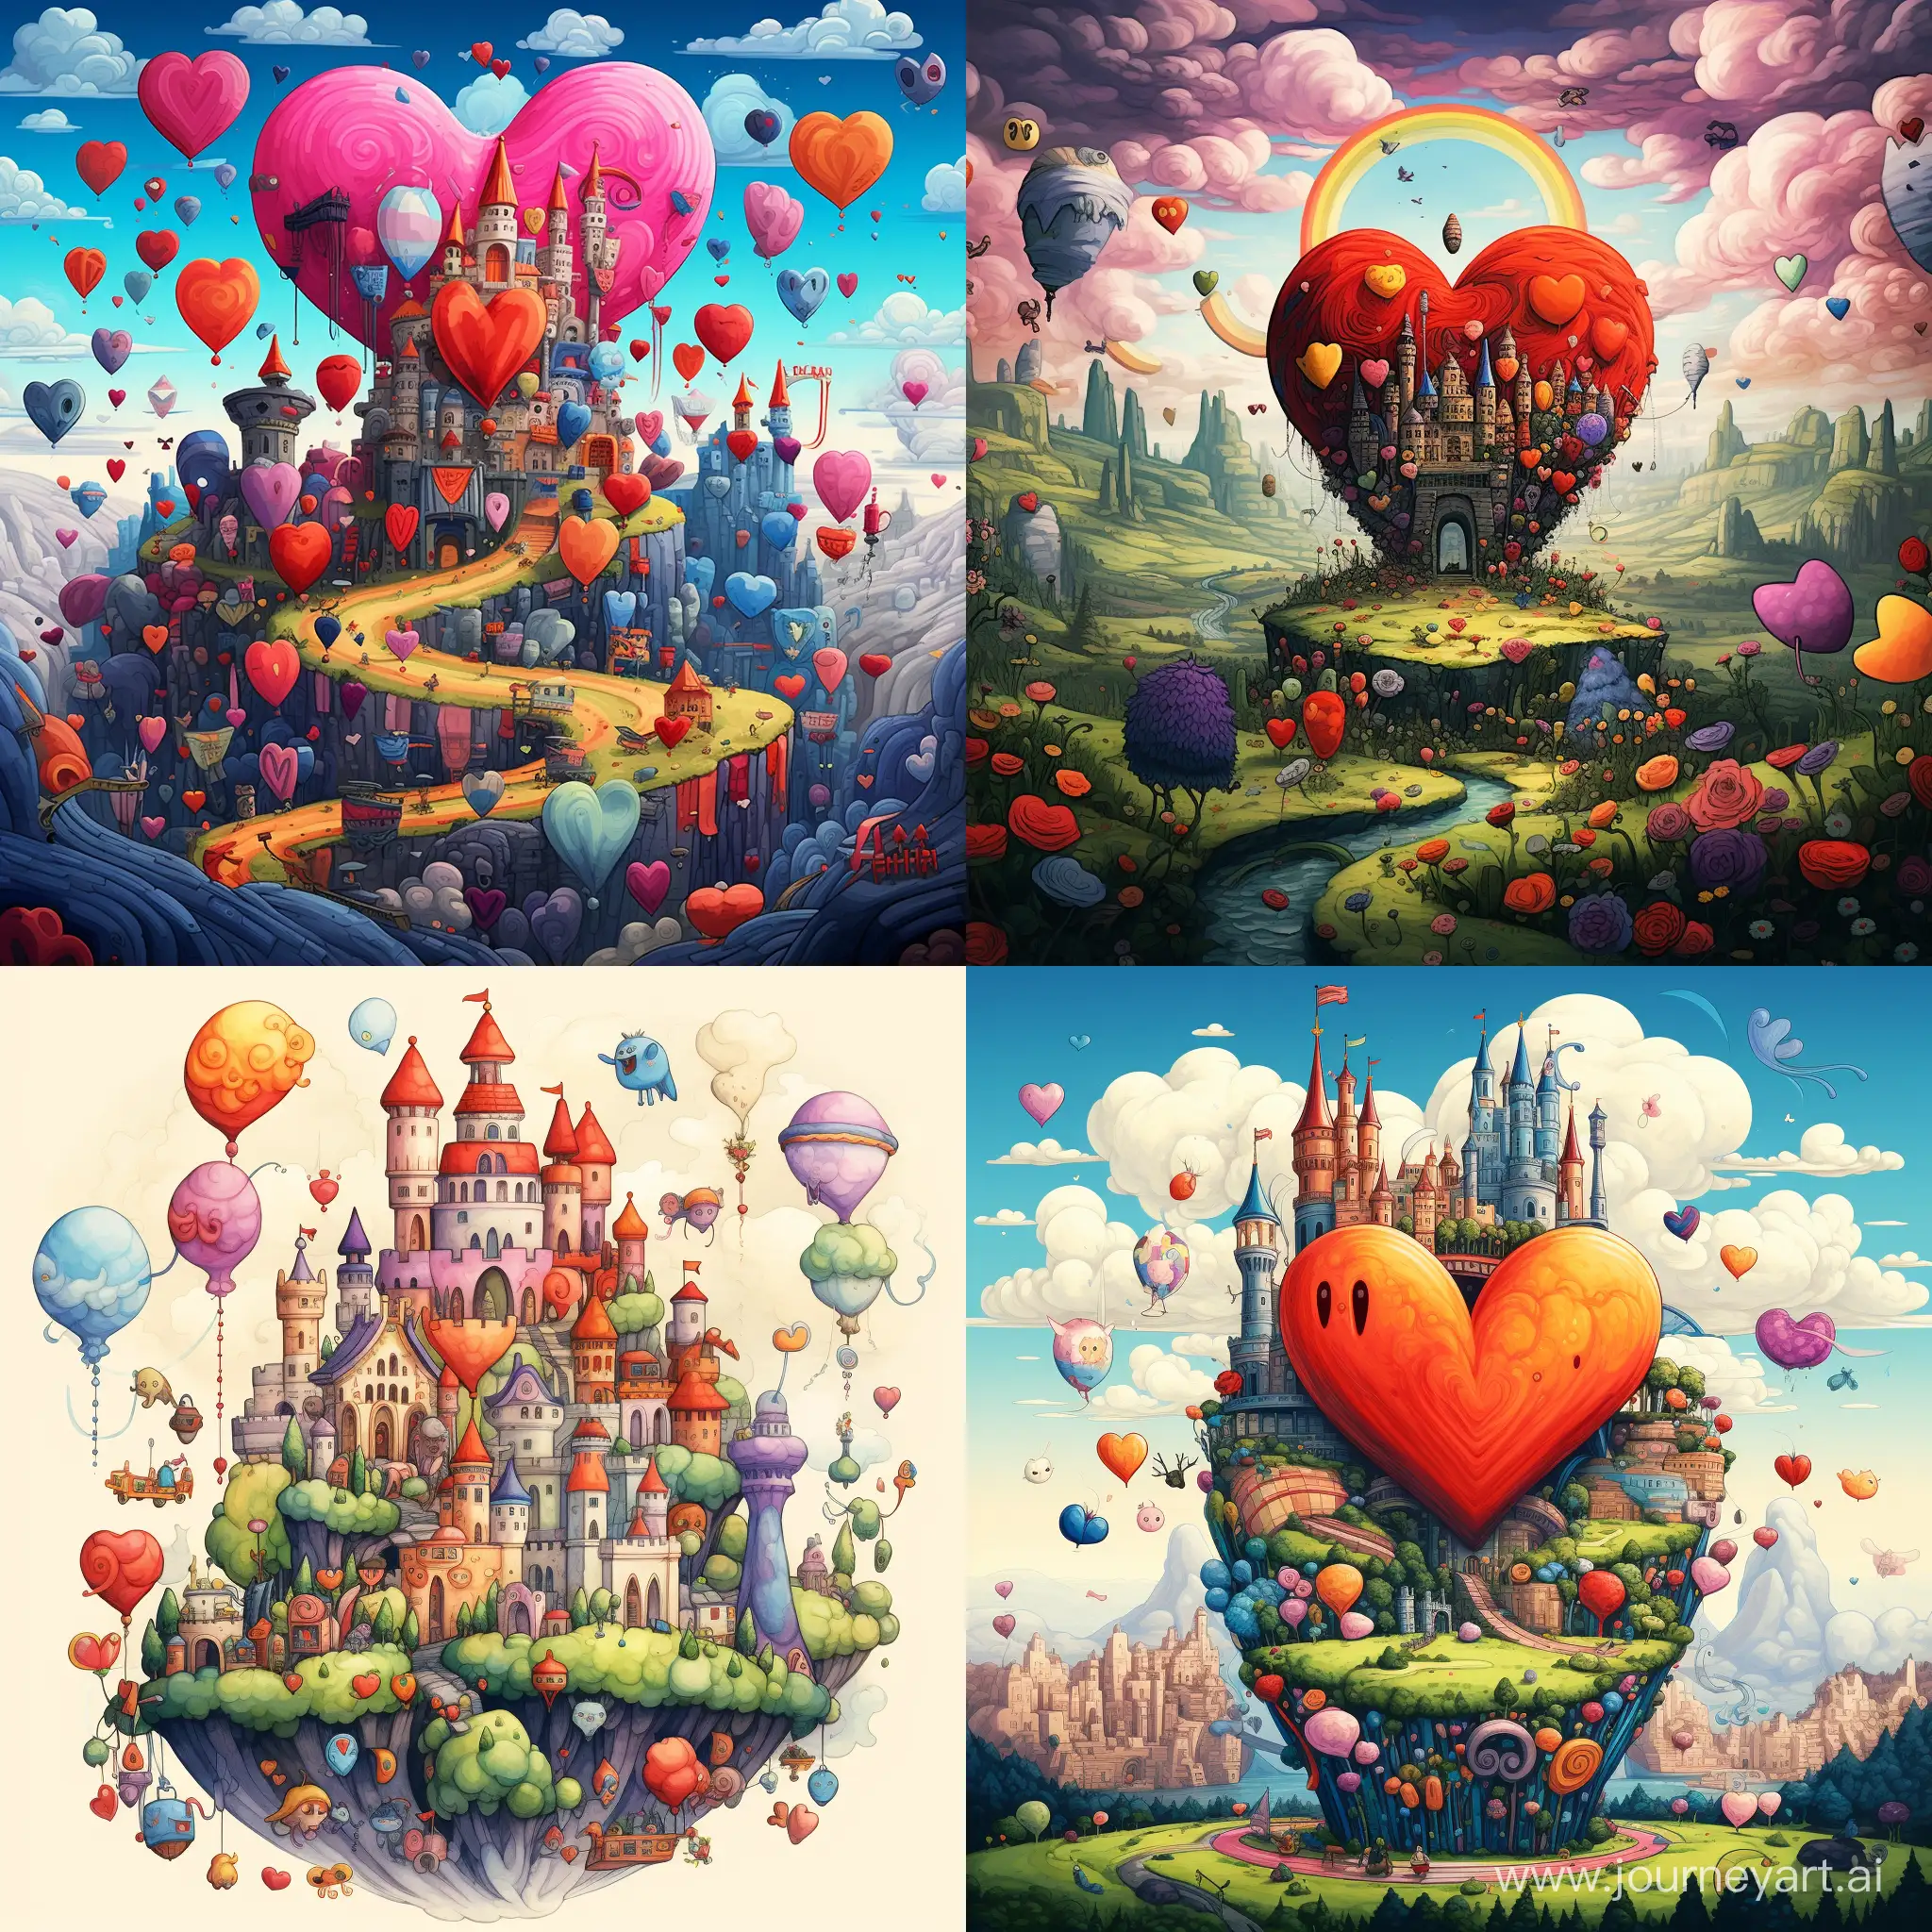 Joyful-Hearts-Adventure-Whimsical-Concept-Art-in-the-Style-of-Adventure-Time